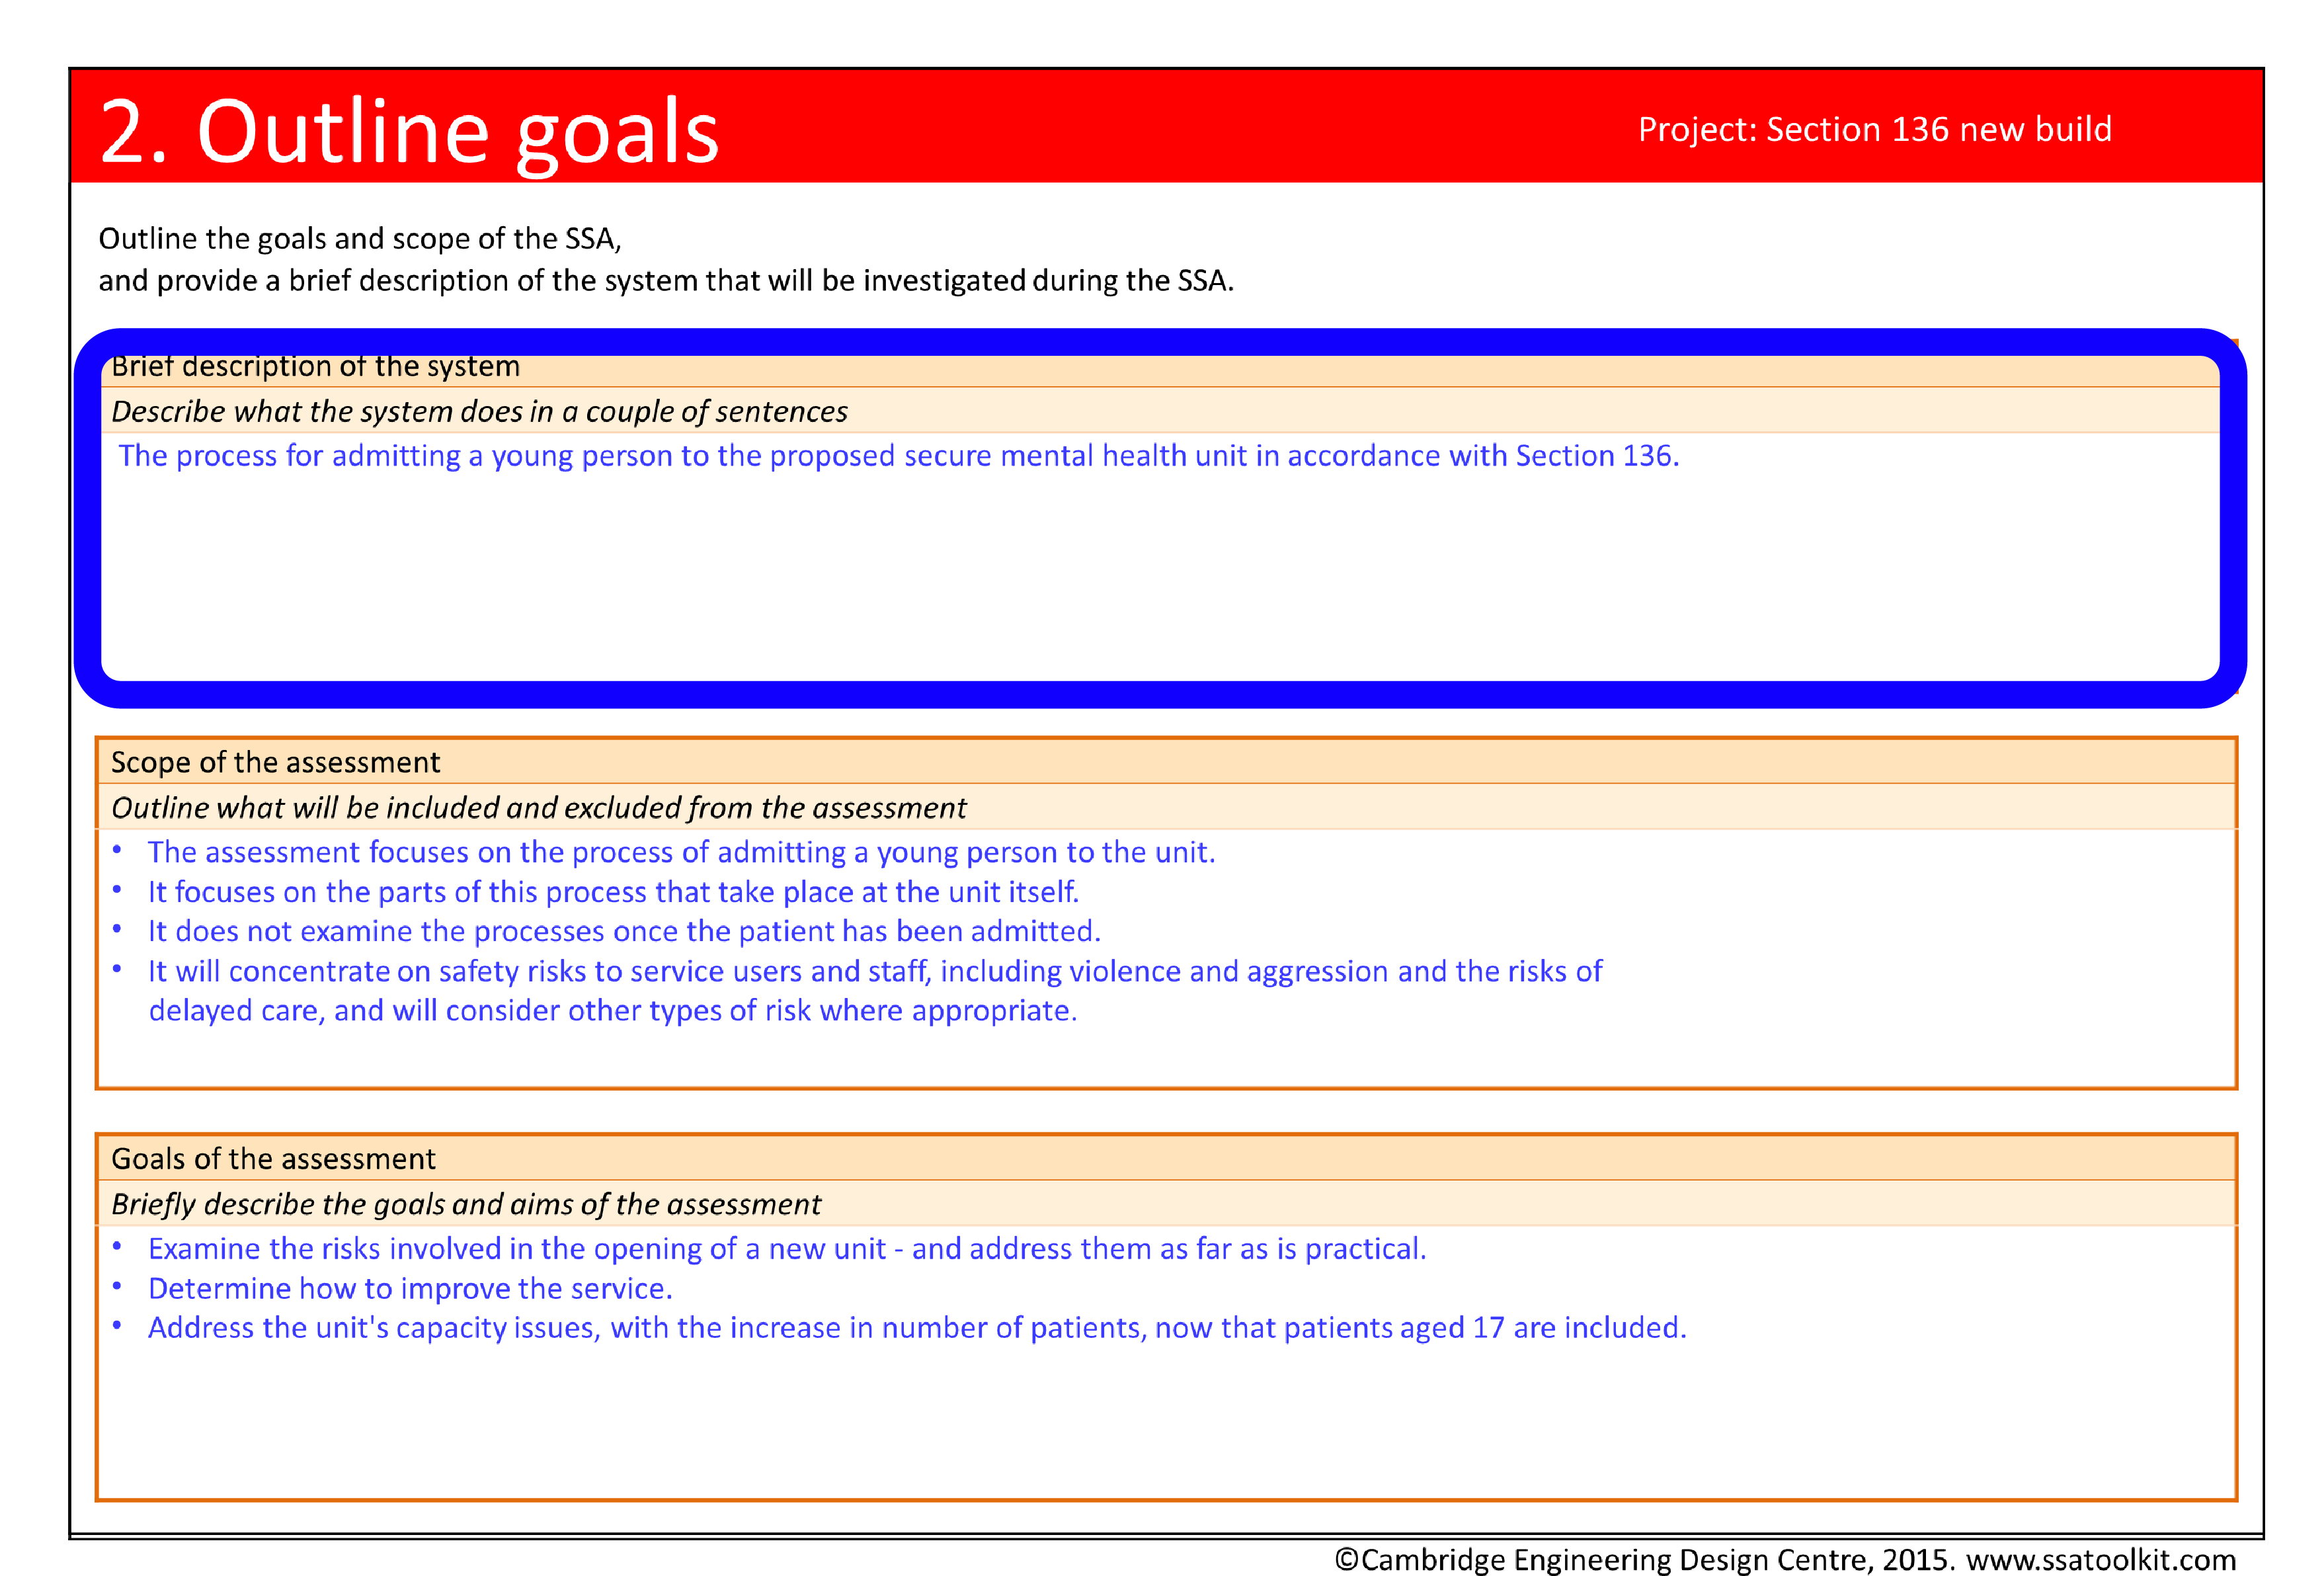 Screenshot of the Outline goals page from the Section 136 case study. The system is described as the process for admitting a young person to the proposed secure mental health unit in accordance with Section 136. The full form in pdf is available from the Resources page.